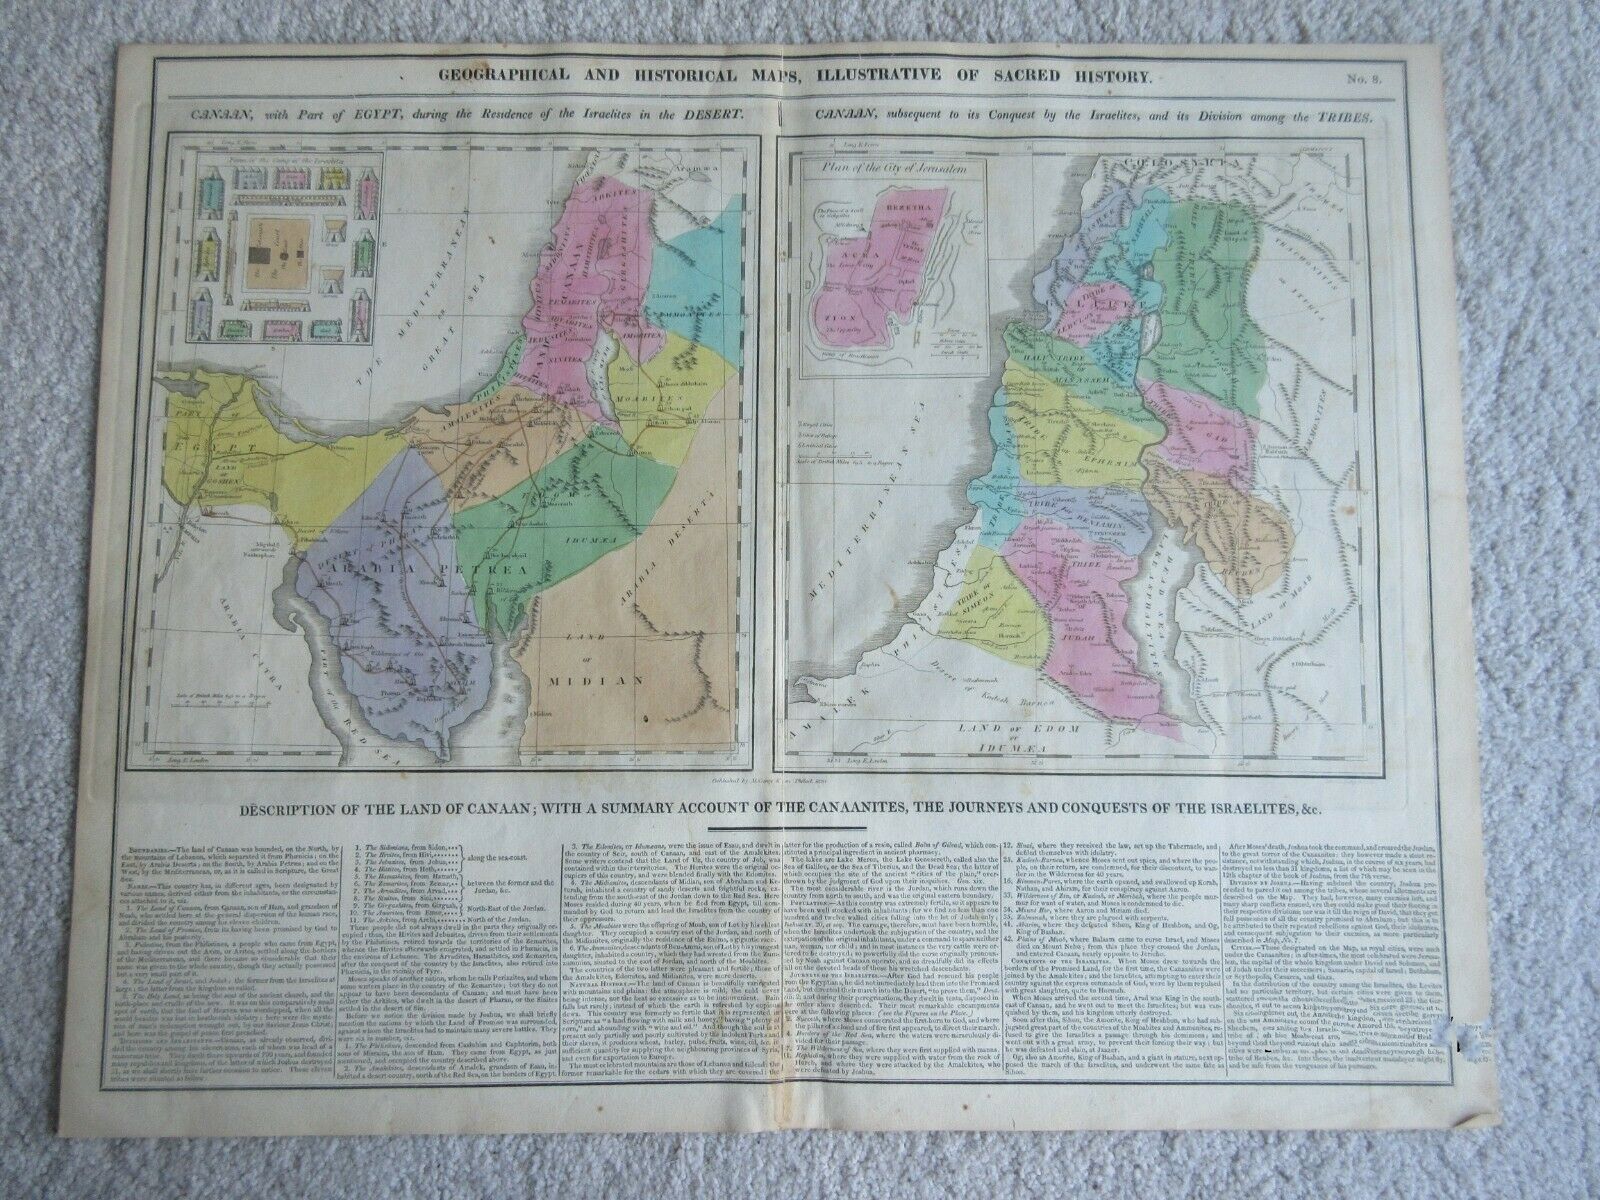 Maps Of Canaan And Egypt (1820), With Historical Text Re Israelites, Handcolored